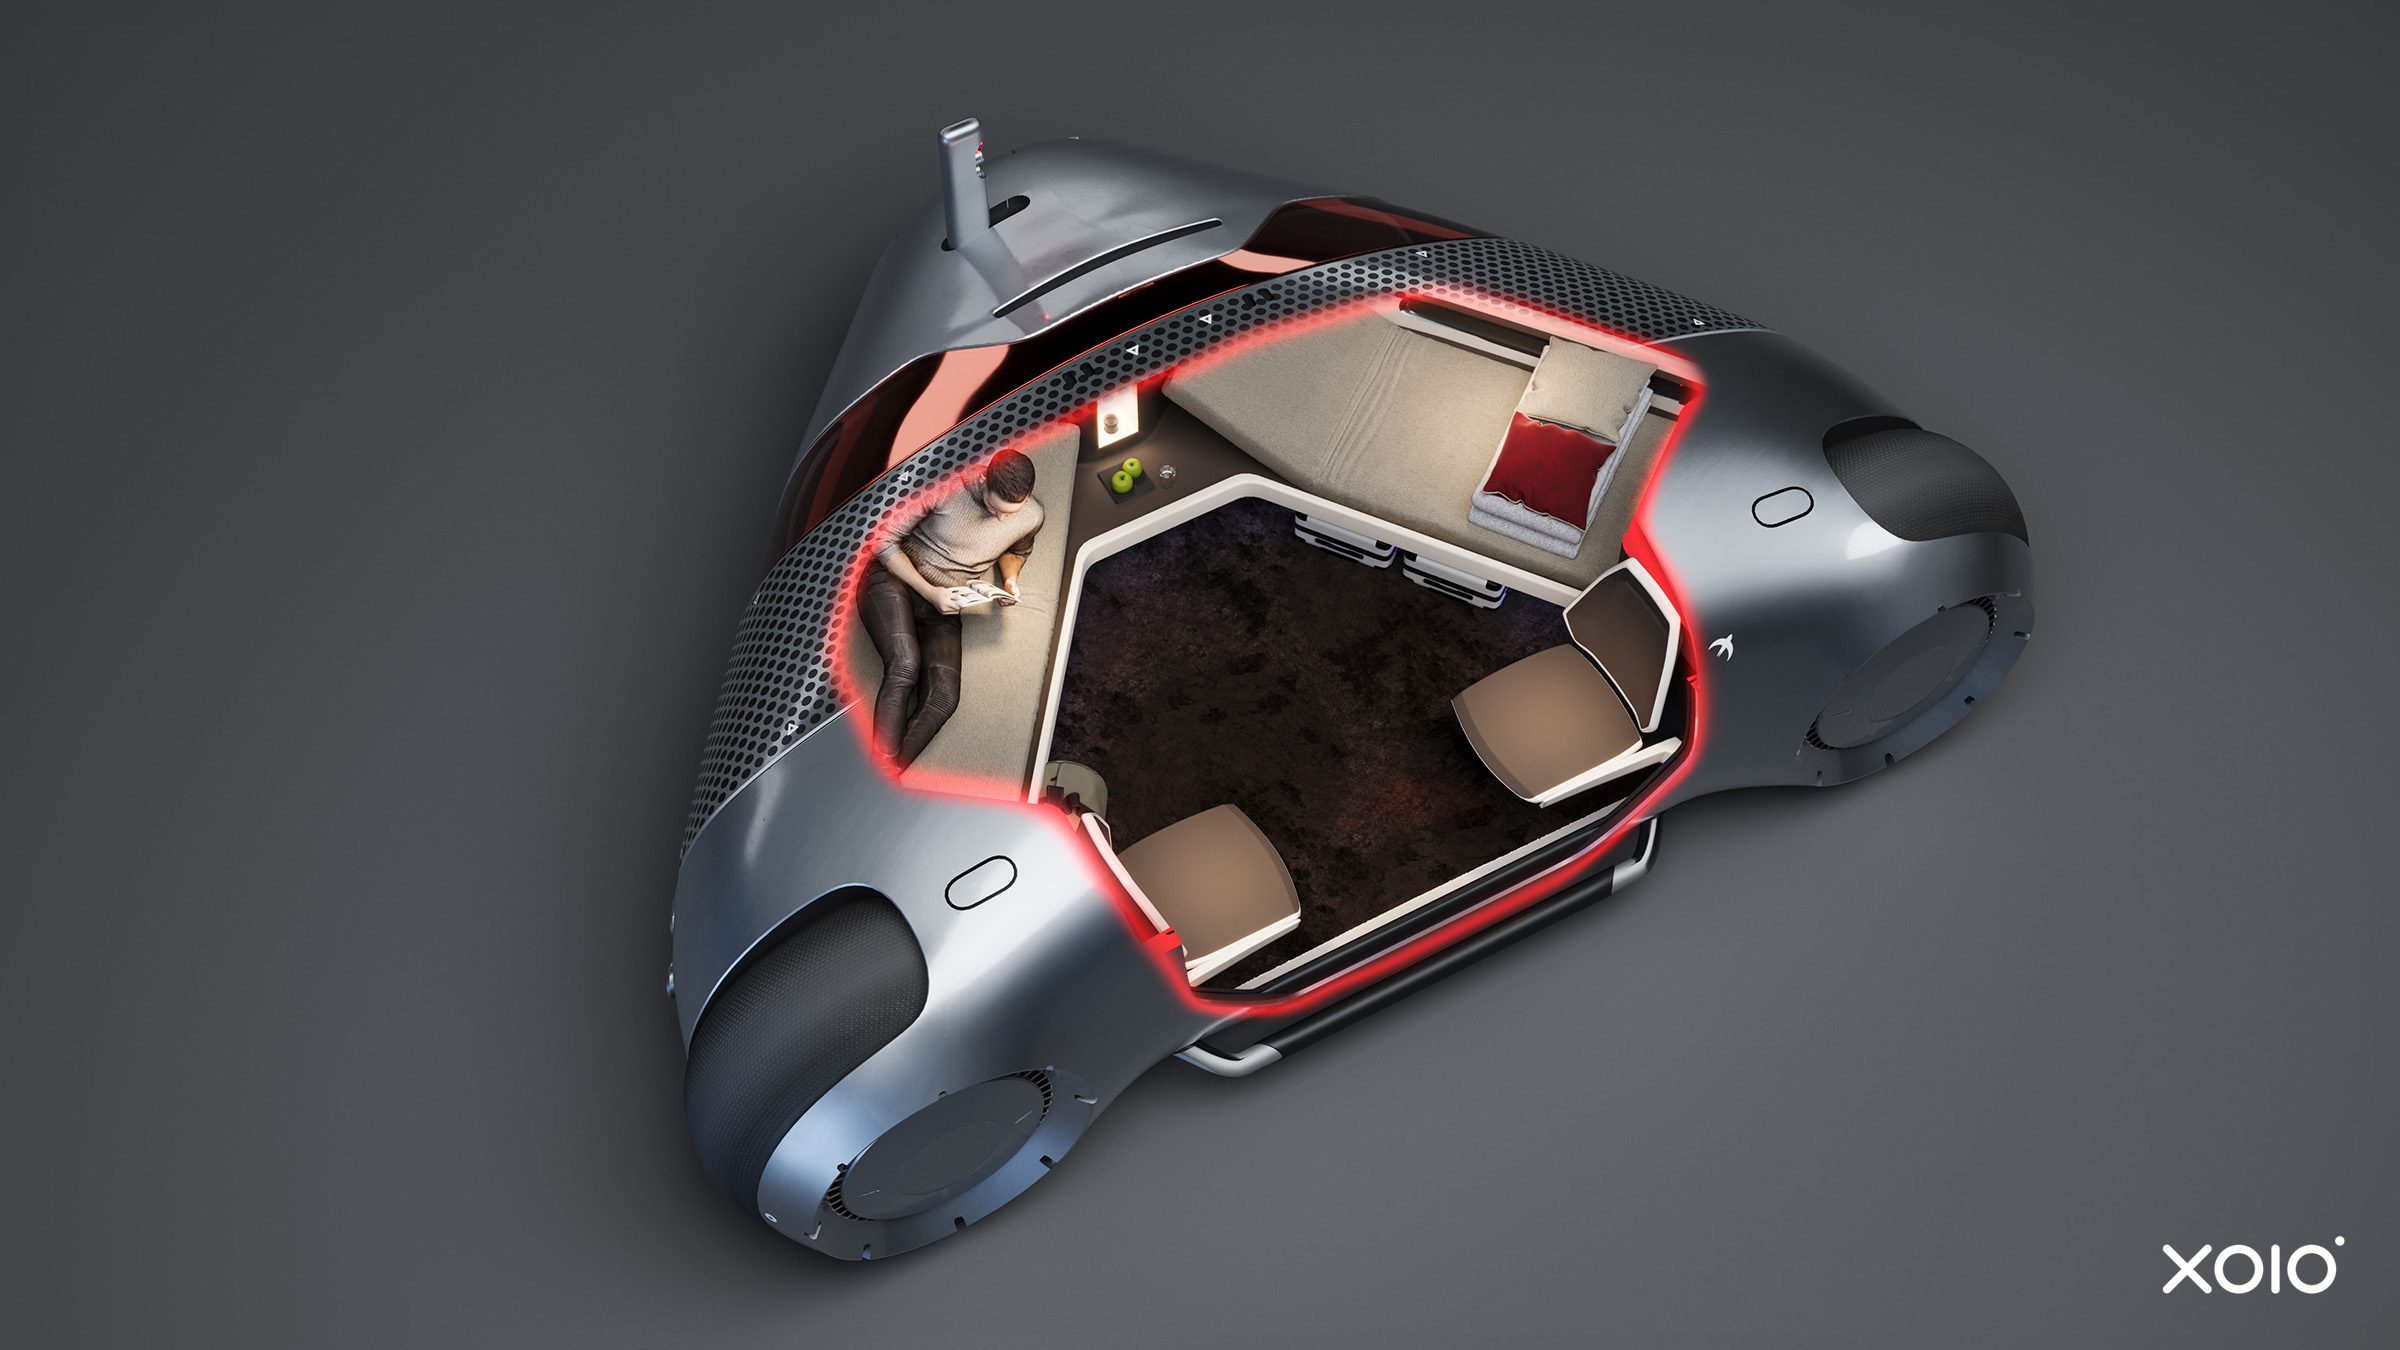 The car's design boasts a luxurious, low-sitting cabin that is attached to three giant wheels